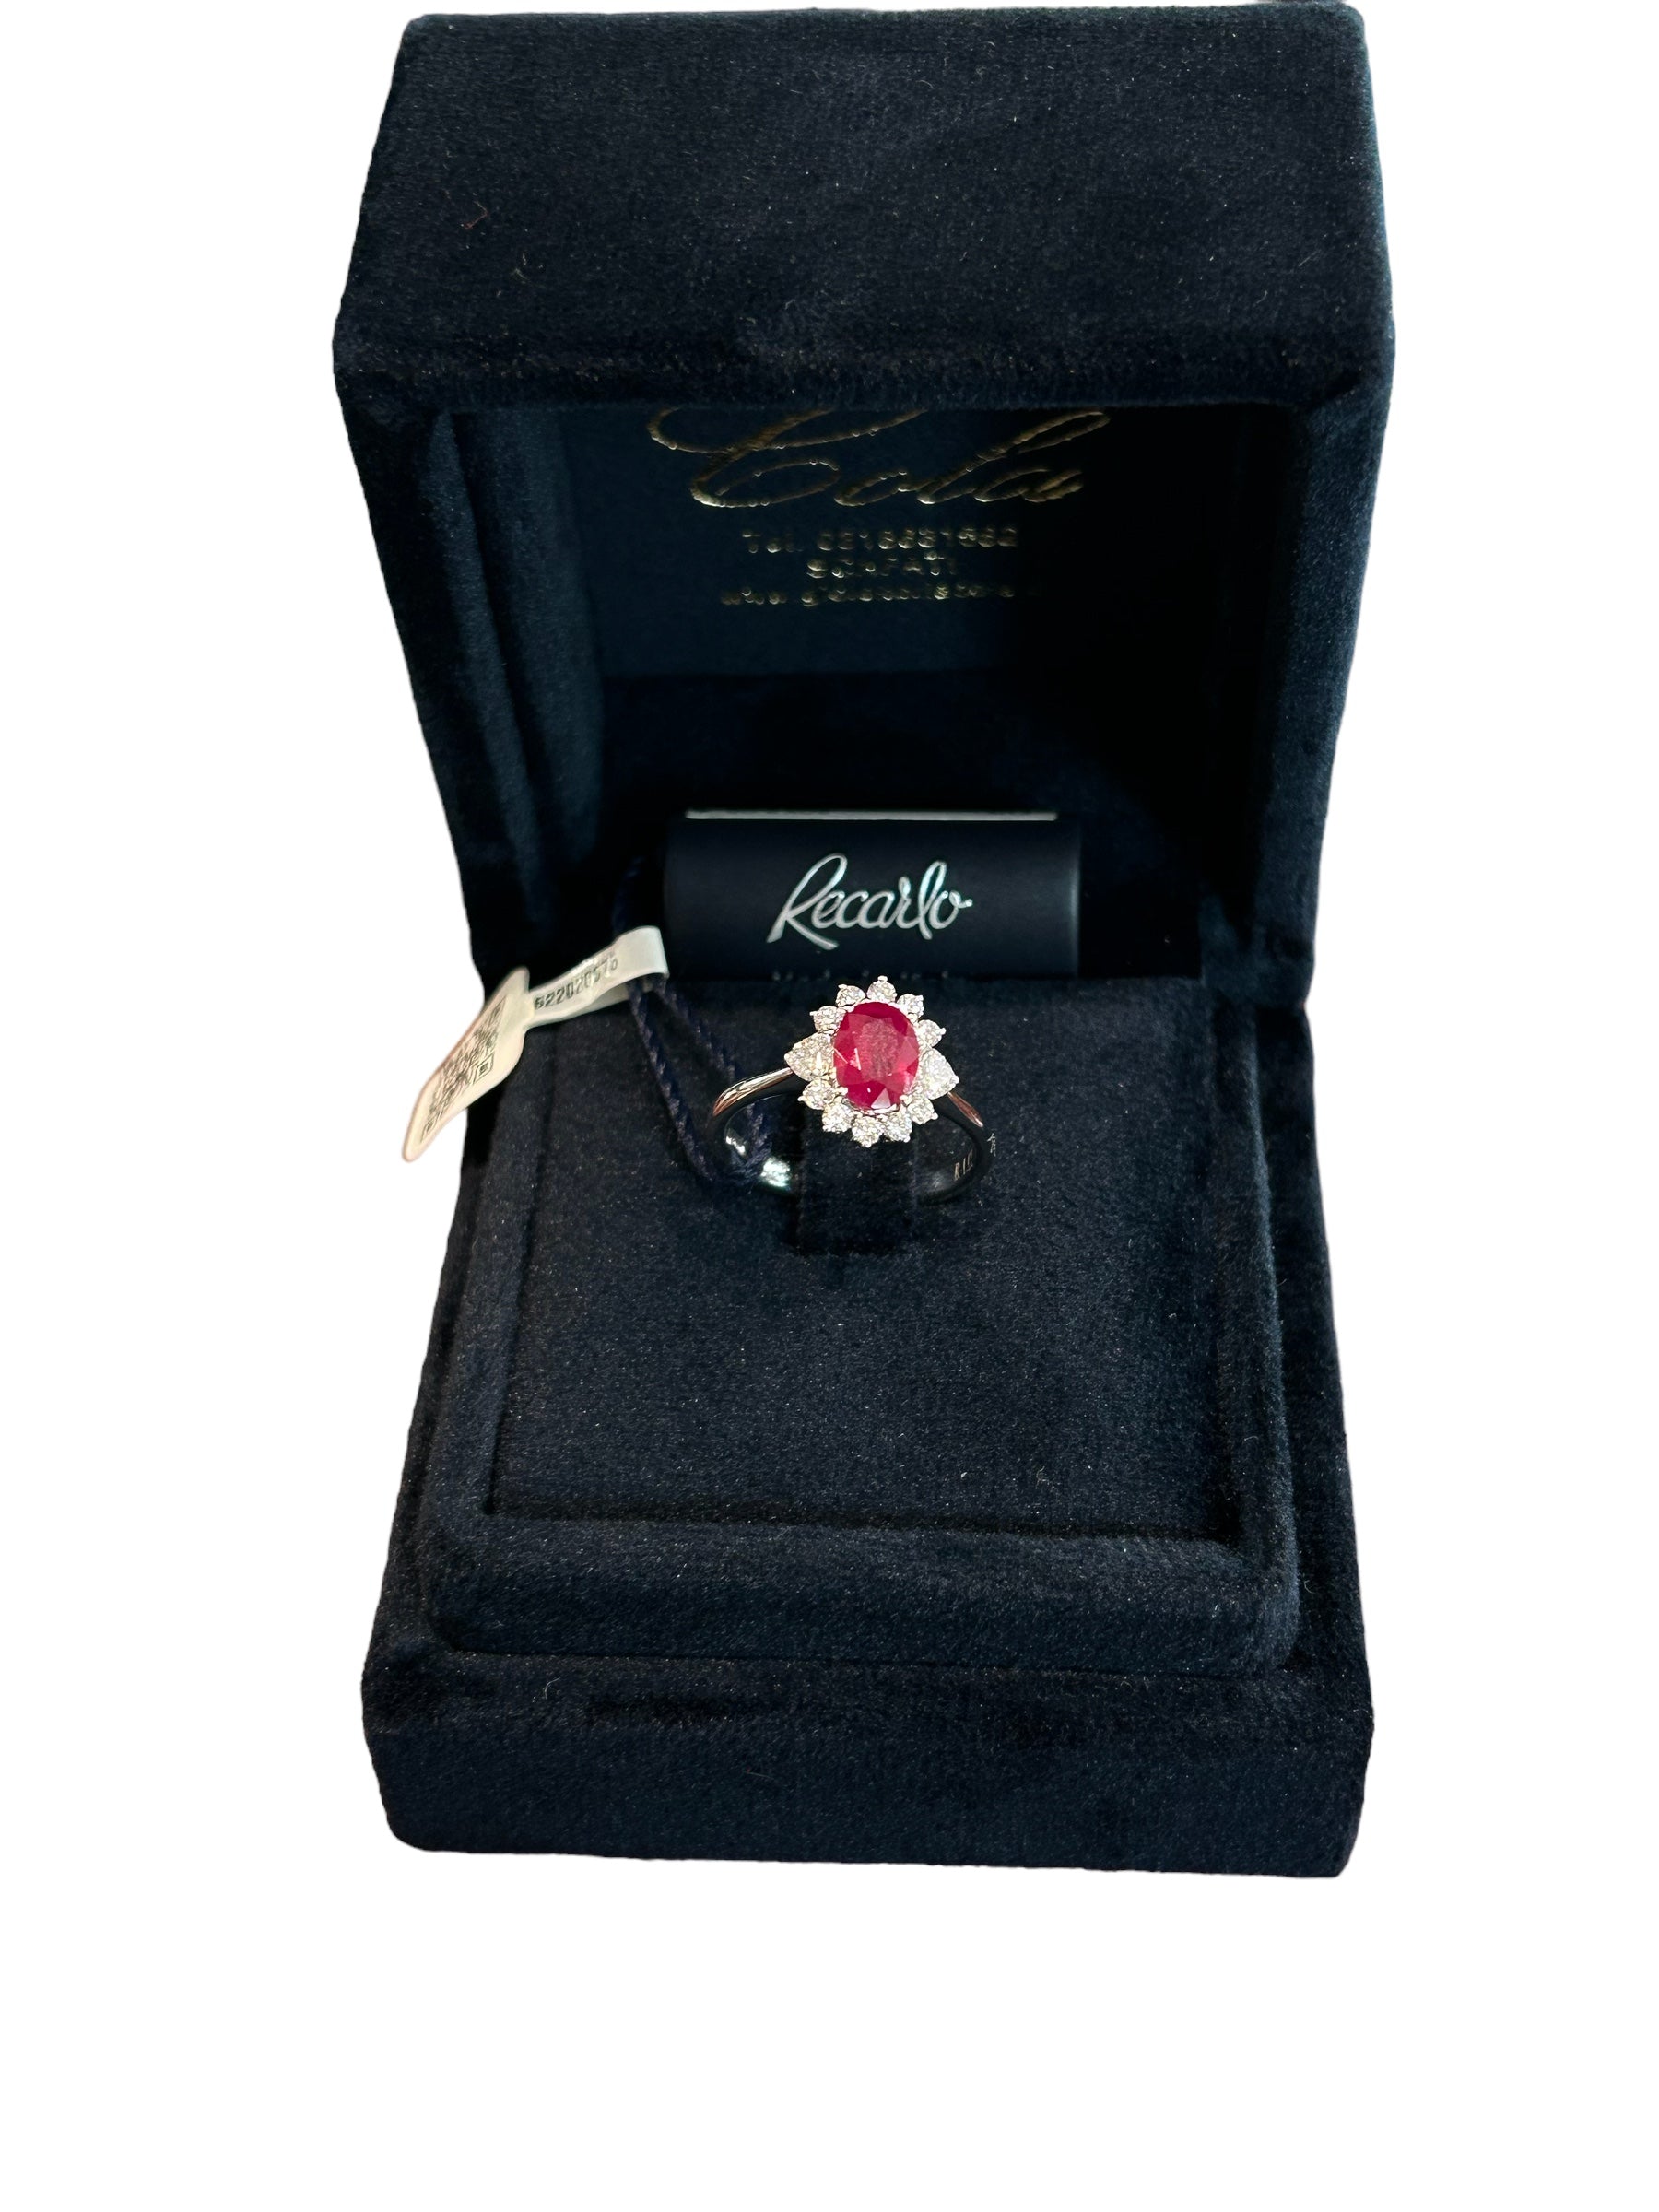 White gold ring with Ruby and diamond ring, 1.12ct rubies - R79CC131/RB090